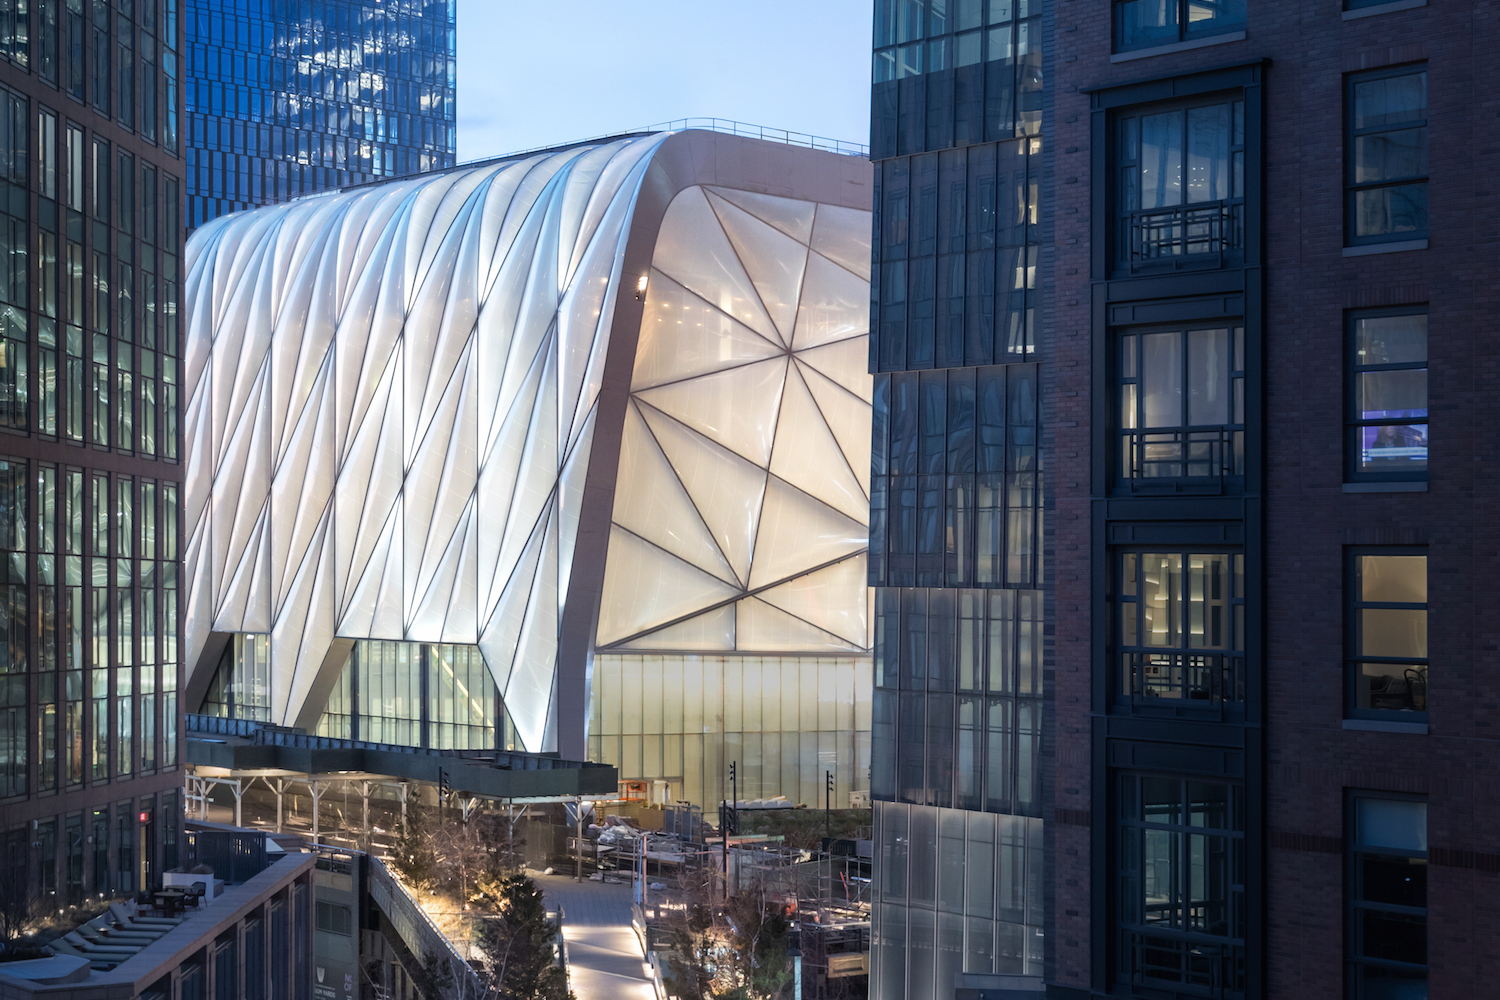 The Shed, New York. Lead Architect: Diller Scofidio + Renfro. Photograph by Iwan Baan.